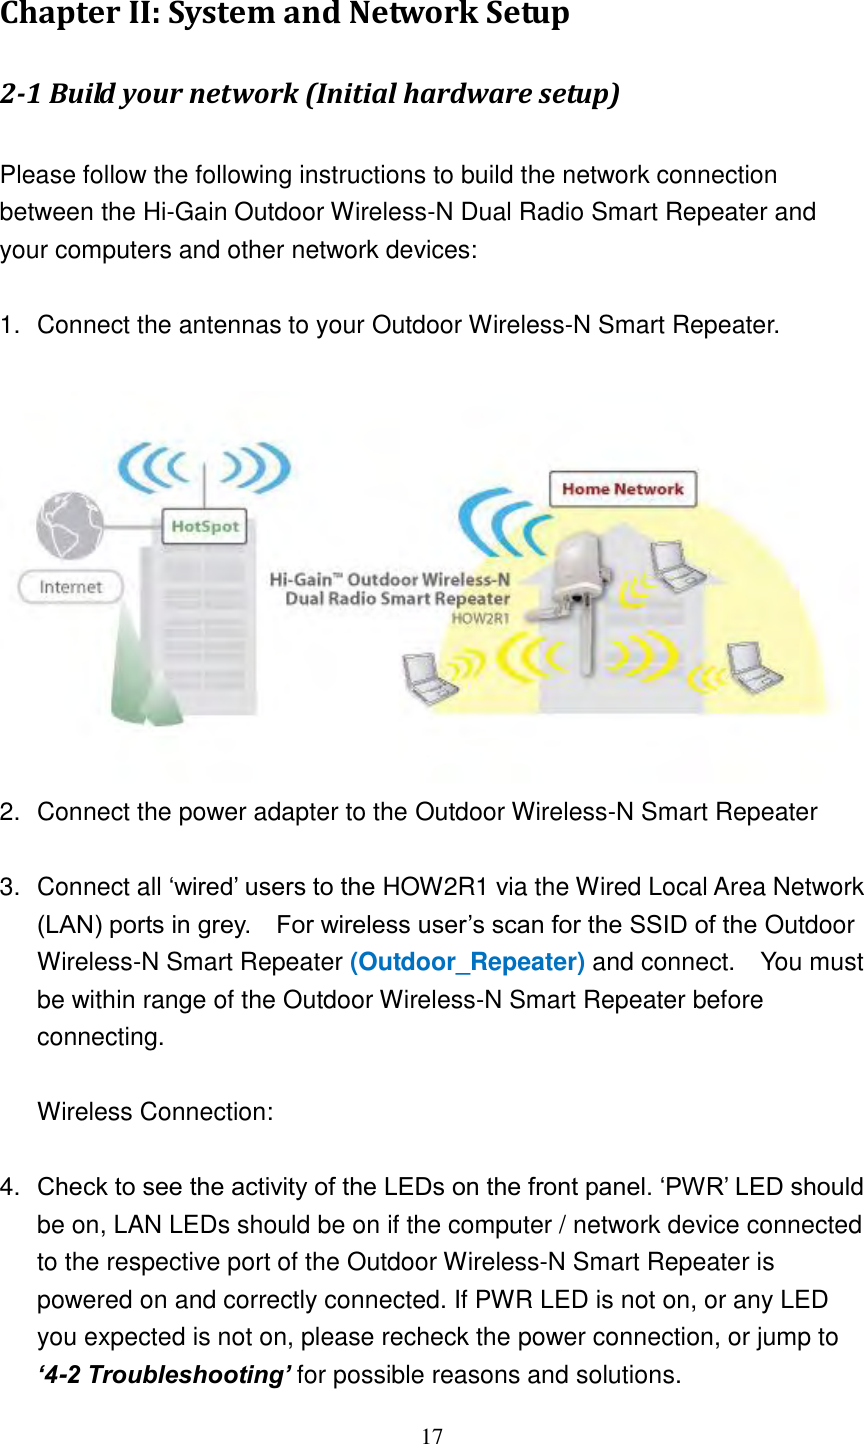 17 Chapter II: System and Network Setup 2-1 Build your network (Initial hardware setup)    Please follow the following instructions to build the network connection between the Hi-Gain Outdoor Wireless-N Dual Radio Smart Repeater and your computers and other network devices:  1.  Connect the antennas to your Outdoor Wireless-N Smart Repeater.     2.  Connect the power adapter to the Outdoor Wireless-N Smart Repeater  3.  Connect all „wired‟ users to the HOW2R1 via the Wired Local Area Network (LAN) ports in grey.    For wireless user‟s scan for the SSID of the Outdoor Wireless-N Smart Repeater (Outdoor_Repeater) and connect.    You must be within range of the Outdoor Wireless-N Smart Repeater before connecting.  Wireless Connection:    4. Check to see the activity of the LEDs on the front panel. „PWR‟ LED should be on, LAN LEDs should be on if the computer / network device connected to the respective port of the Outdoor Wireless-N Smart Repeater is powered on and correctly connected. If PWR LED is not on, or any LED you expected is not on, please recheck the power connection, or jump to ‘4-2 Troubleshooting’ for possible reasons and solutions. 